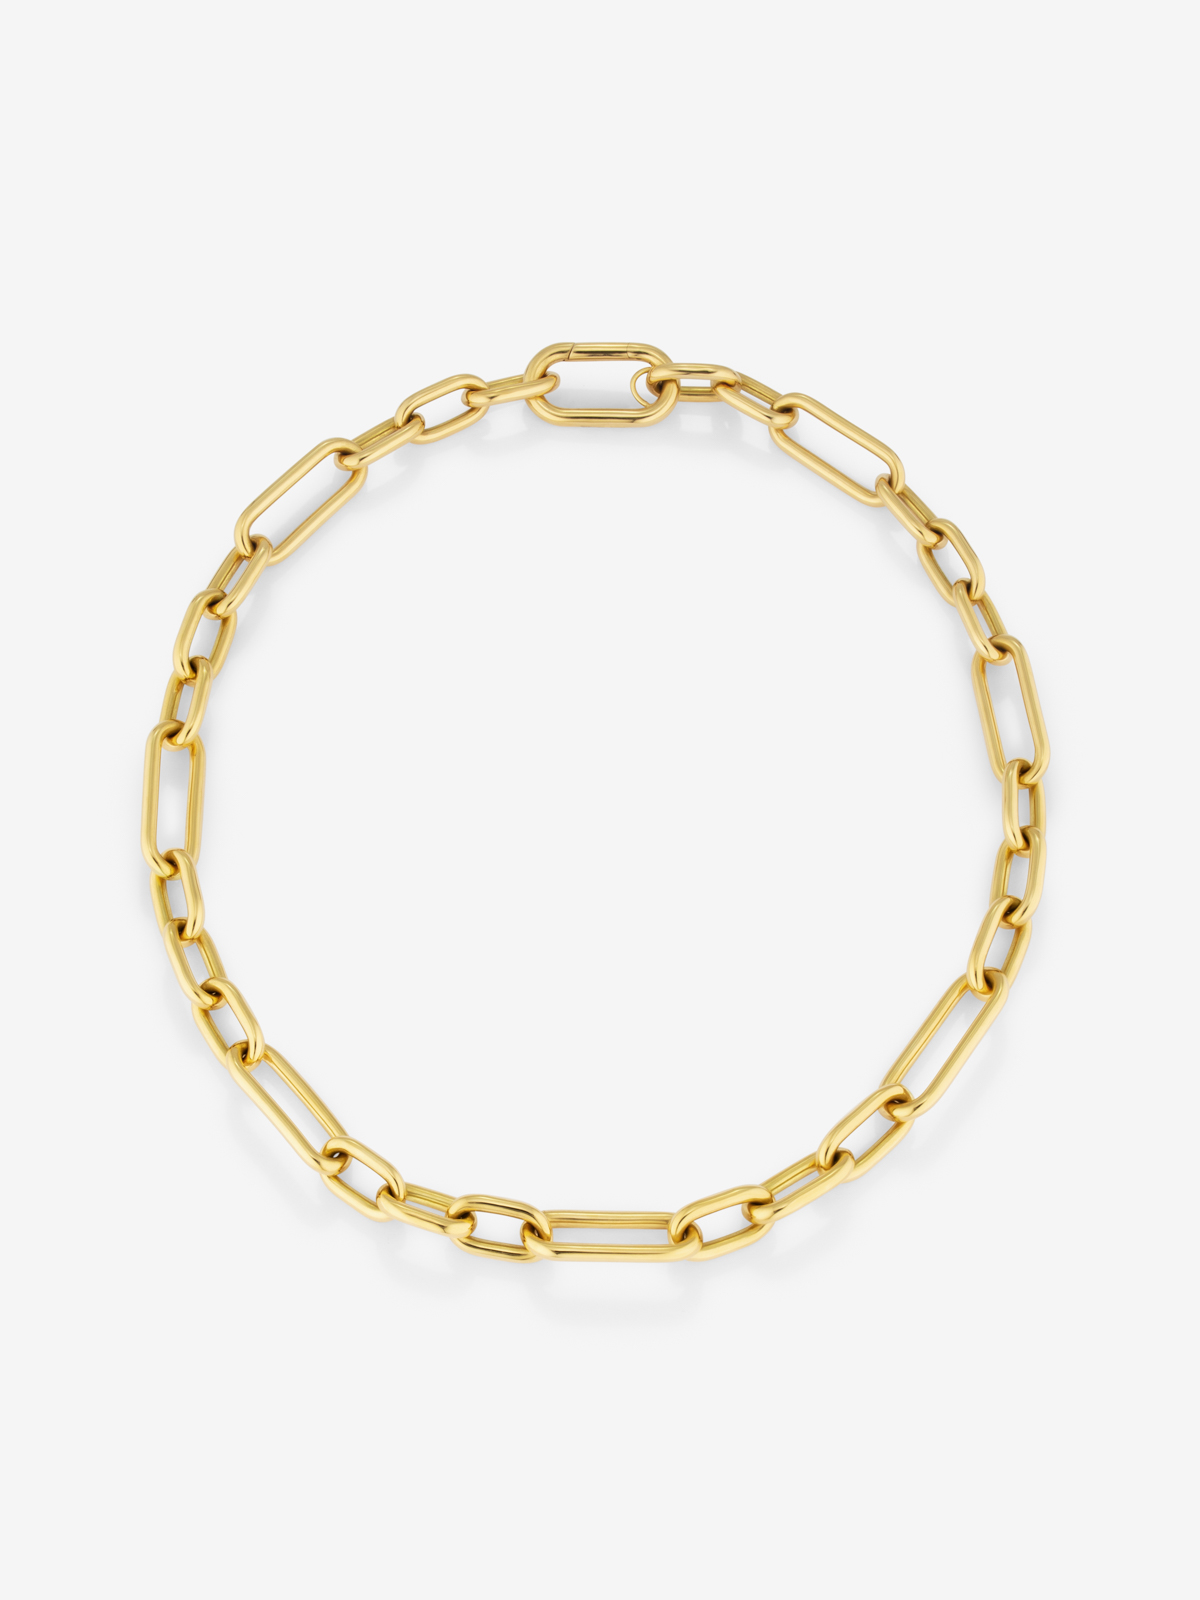 Large 18K yellow gold link necklace